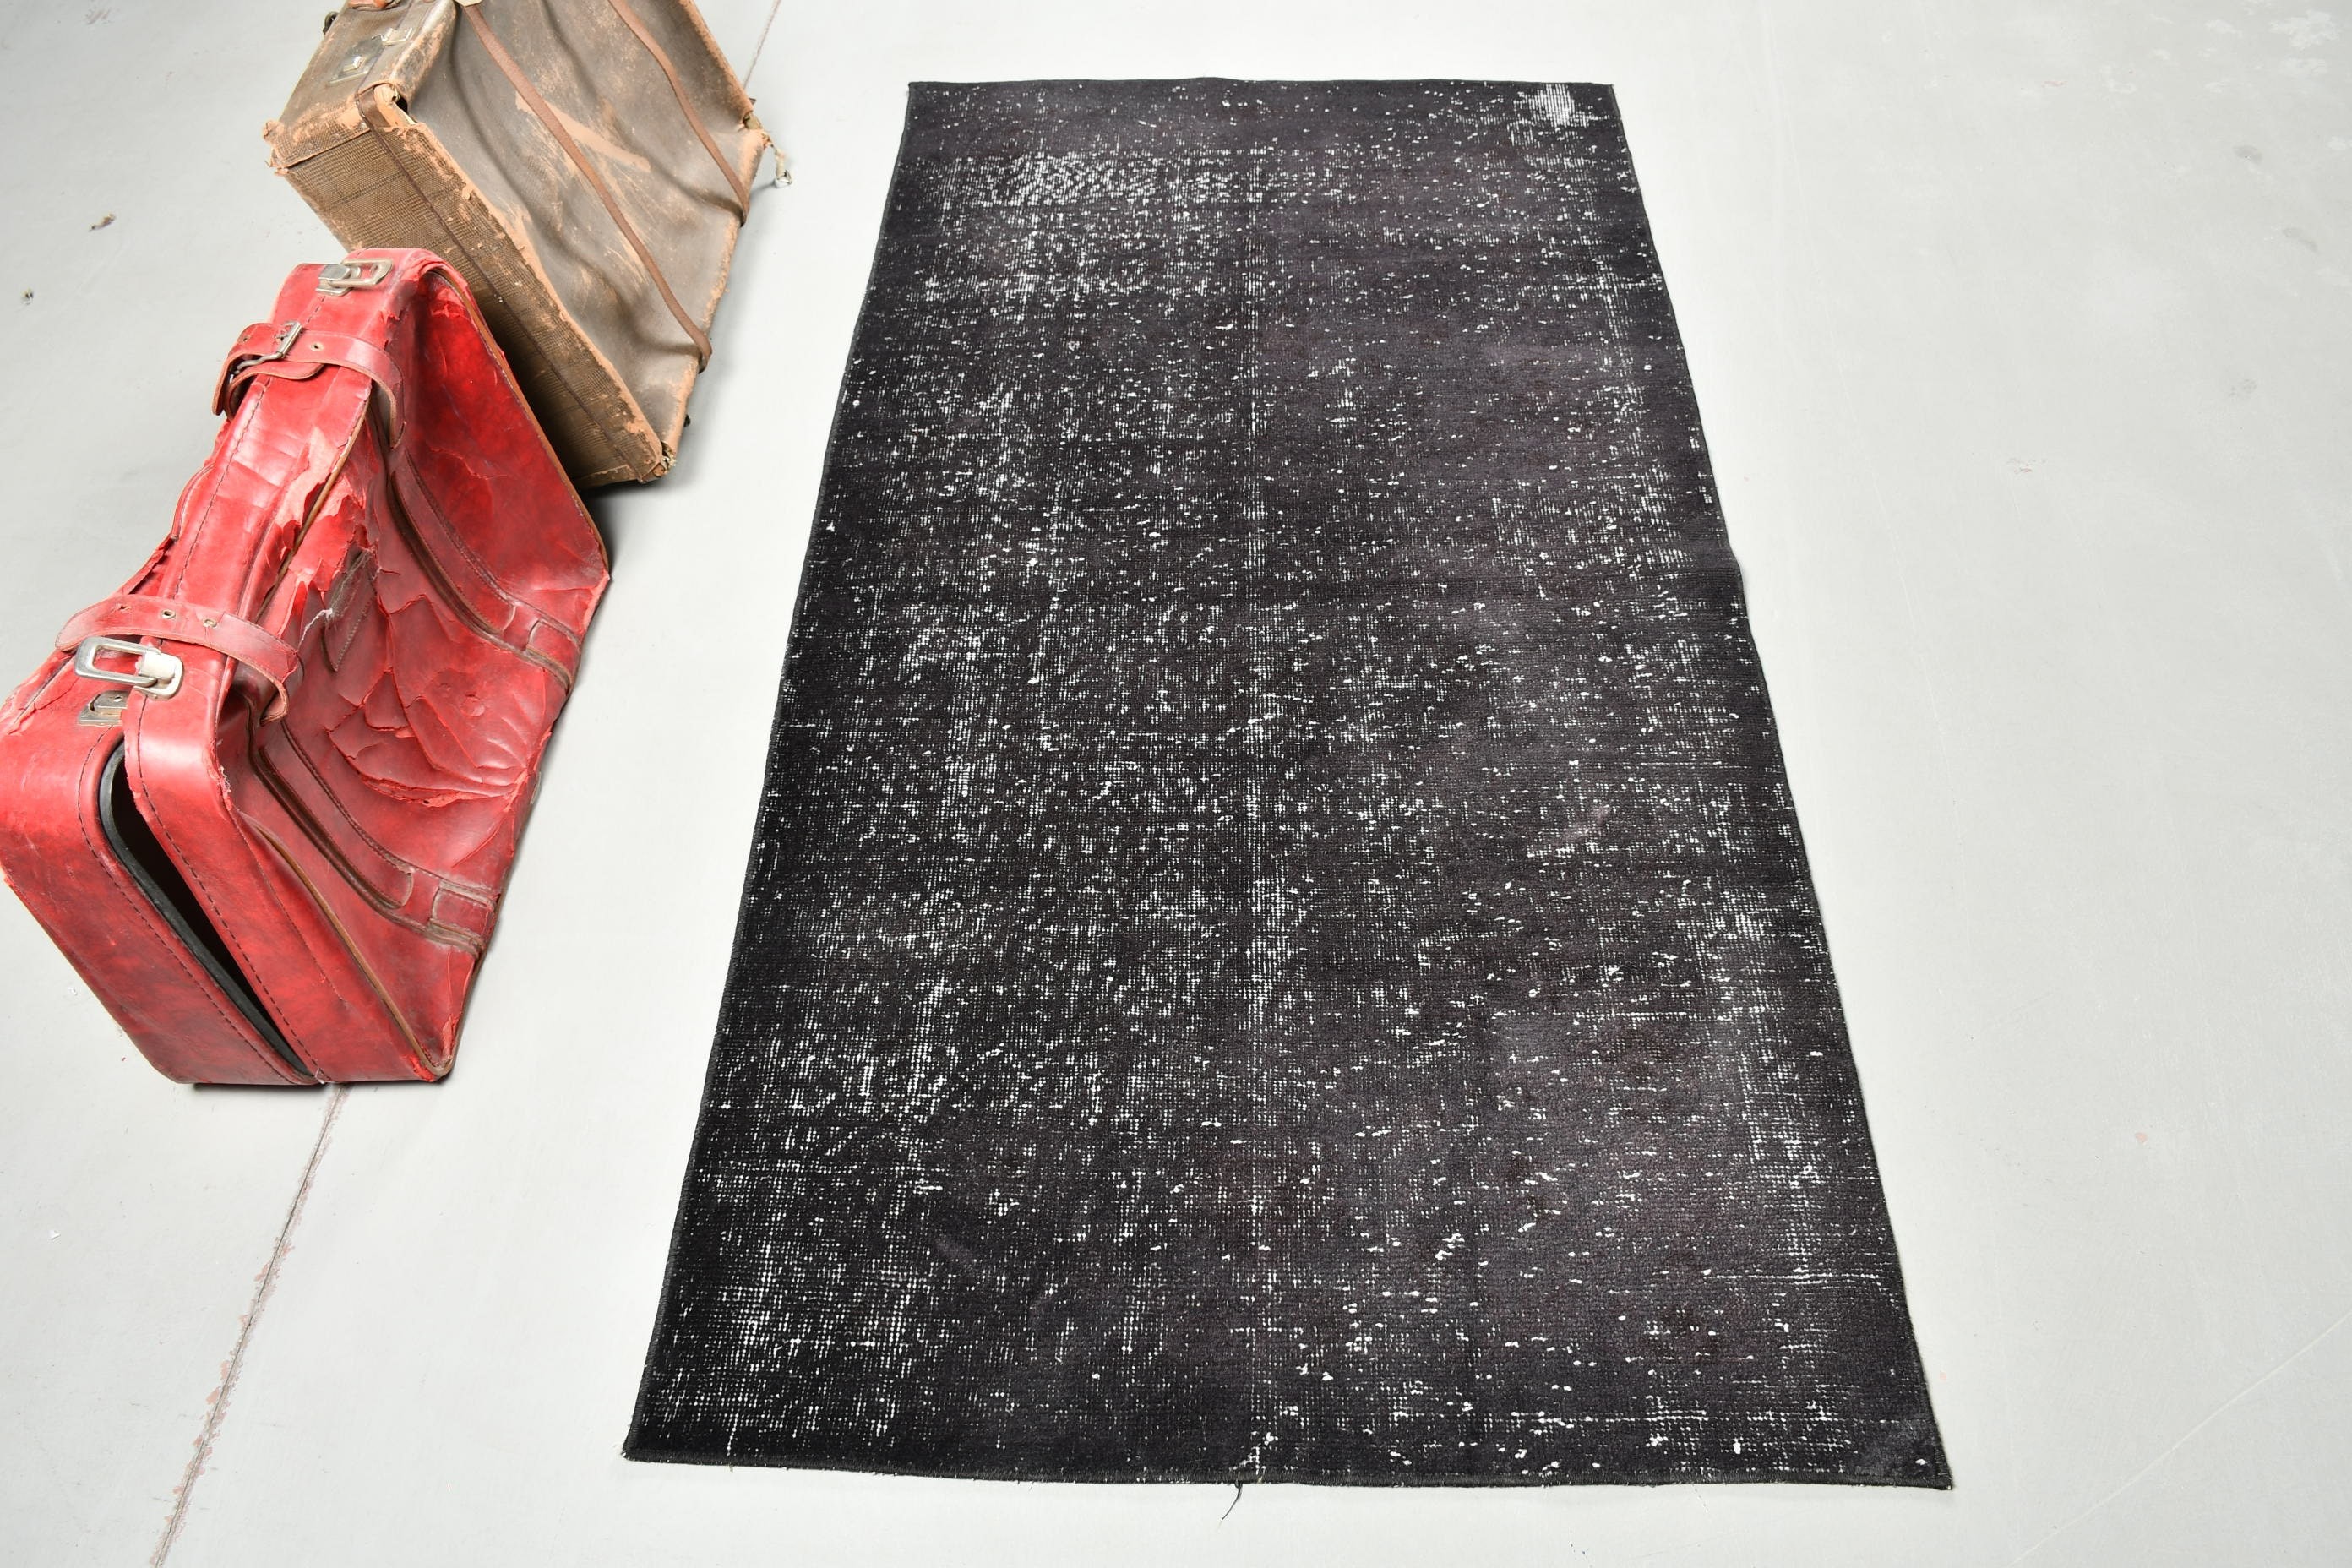 Kitchen Rug, Nursery Rug, Black Floor Rugs, 3.1x6.2 ft Accent Rug, Turkish Rug, Cool Rugs, Home Decor Rug, Vintage Rugs, Rugs for Entry